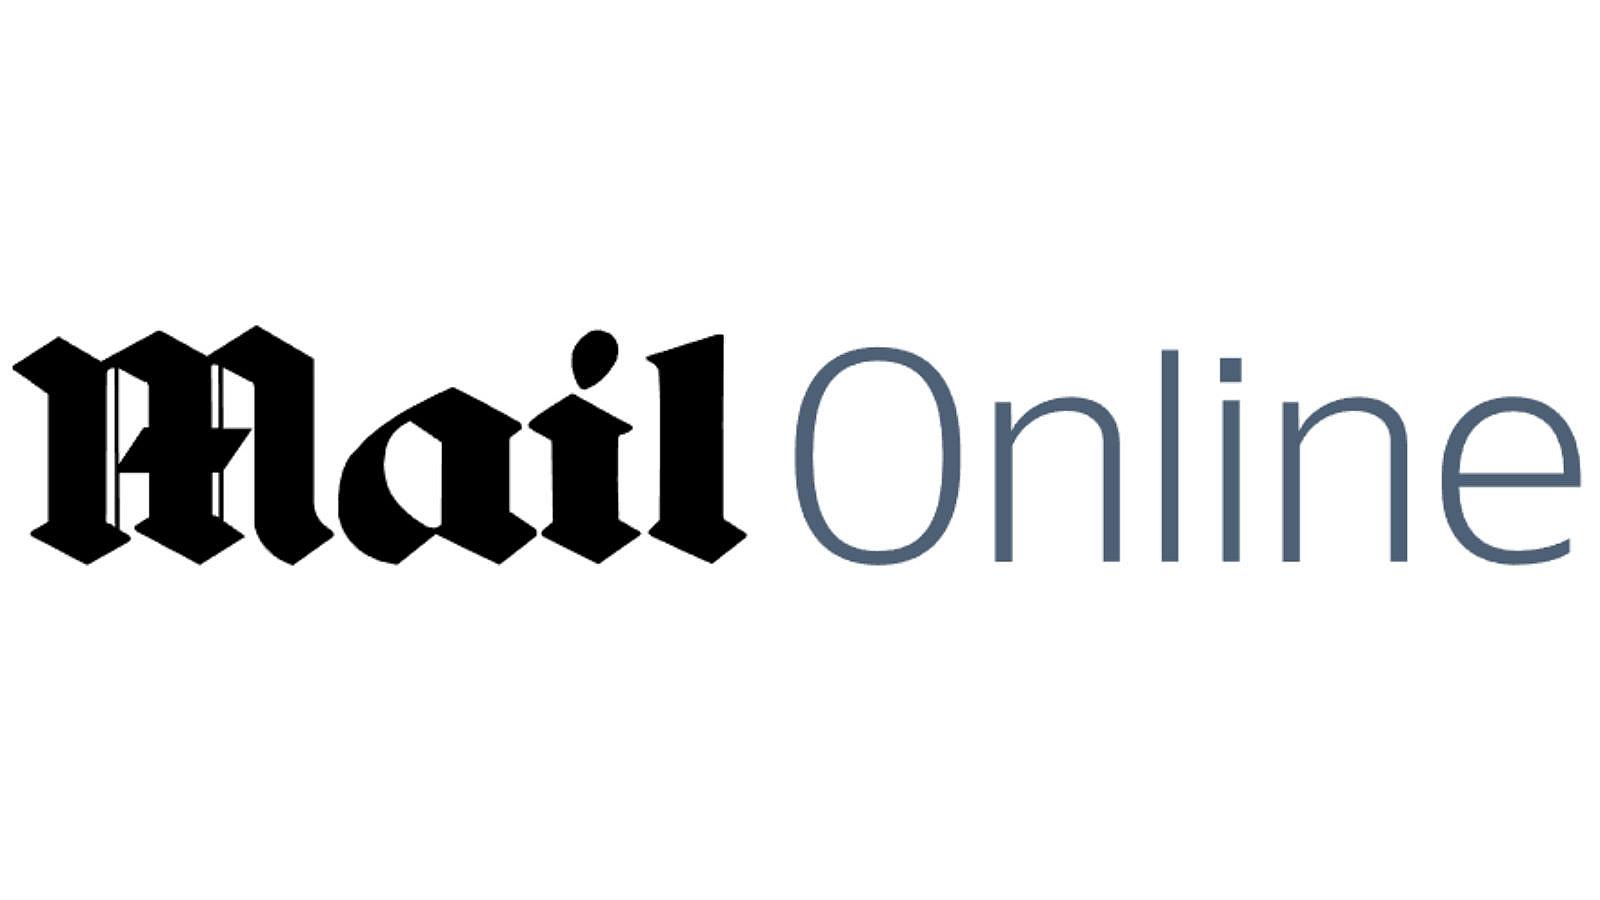 NewsGuard reverses Daily Mail browser warning